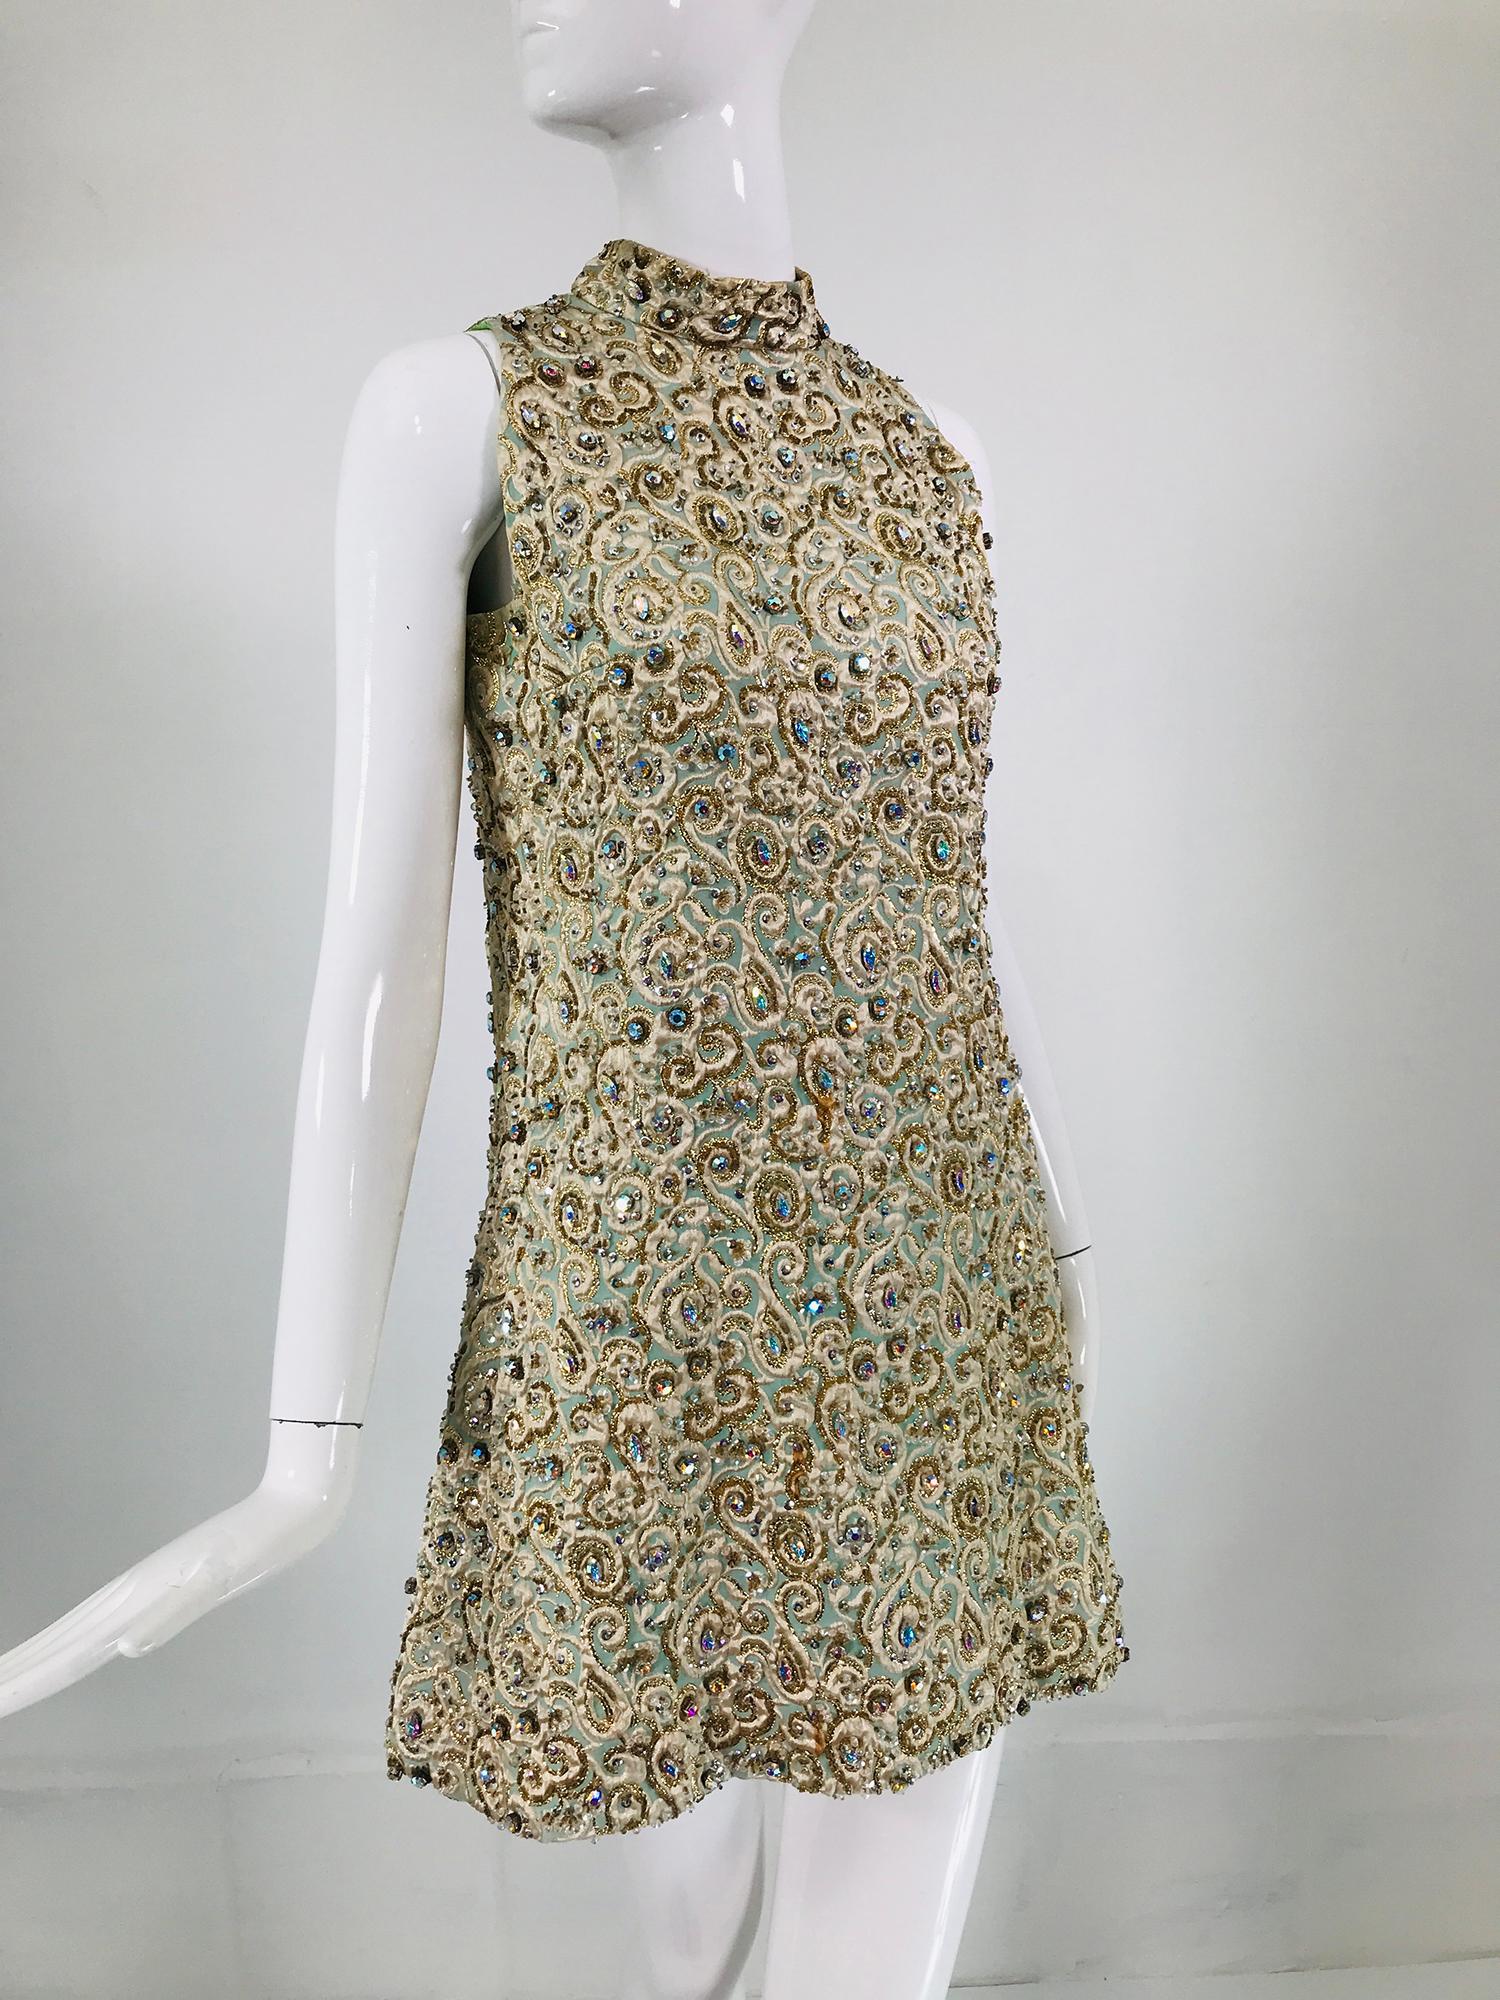 Marie McCarthy for Larry Aldrich heavily beaded brocade, A line halter neck mini dress from the 1960s. Aqua, cream and gold metallic brocade is covered in large and small iridescent prong set rhinestones, sequins and beads. The dress has a mock neck